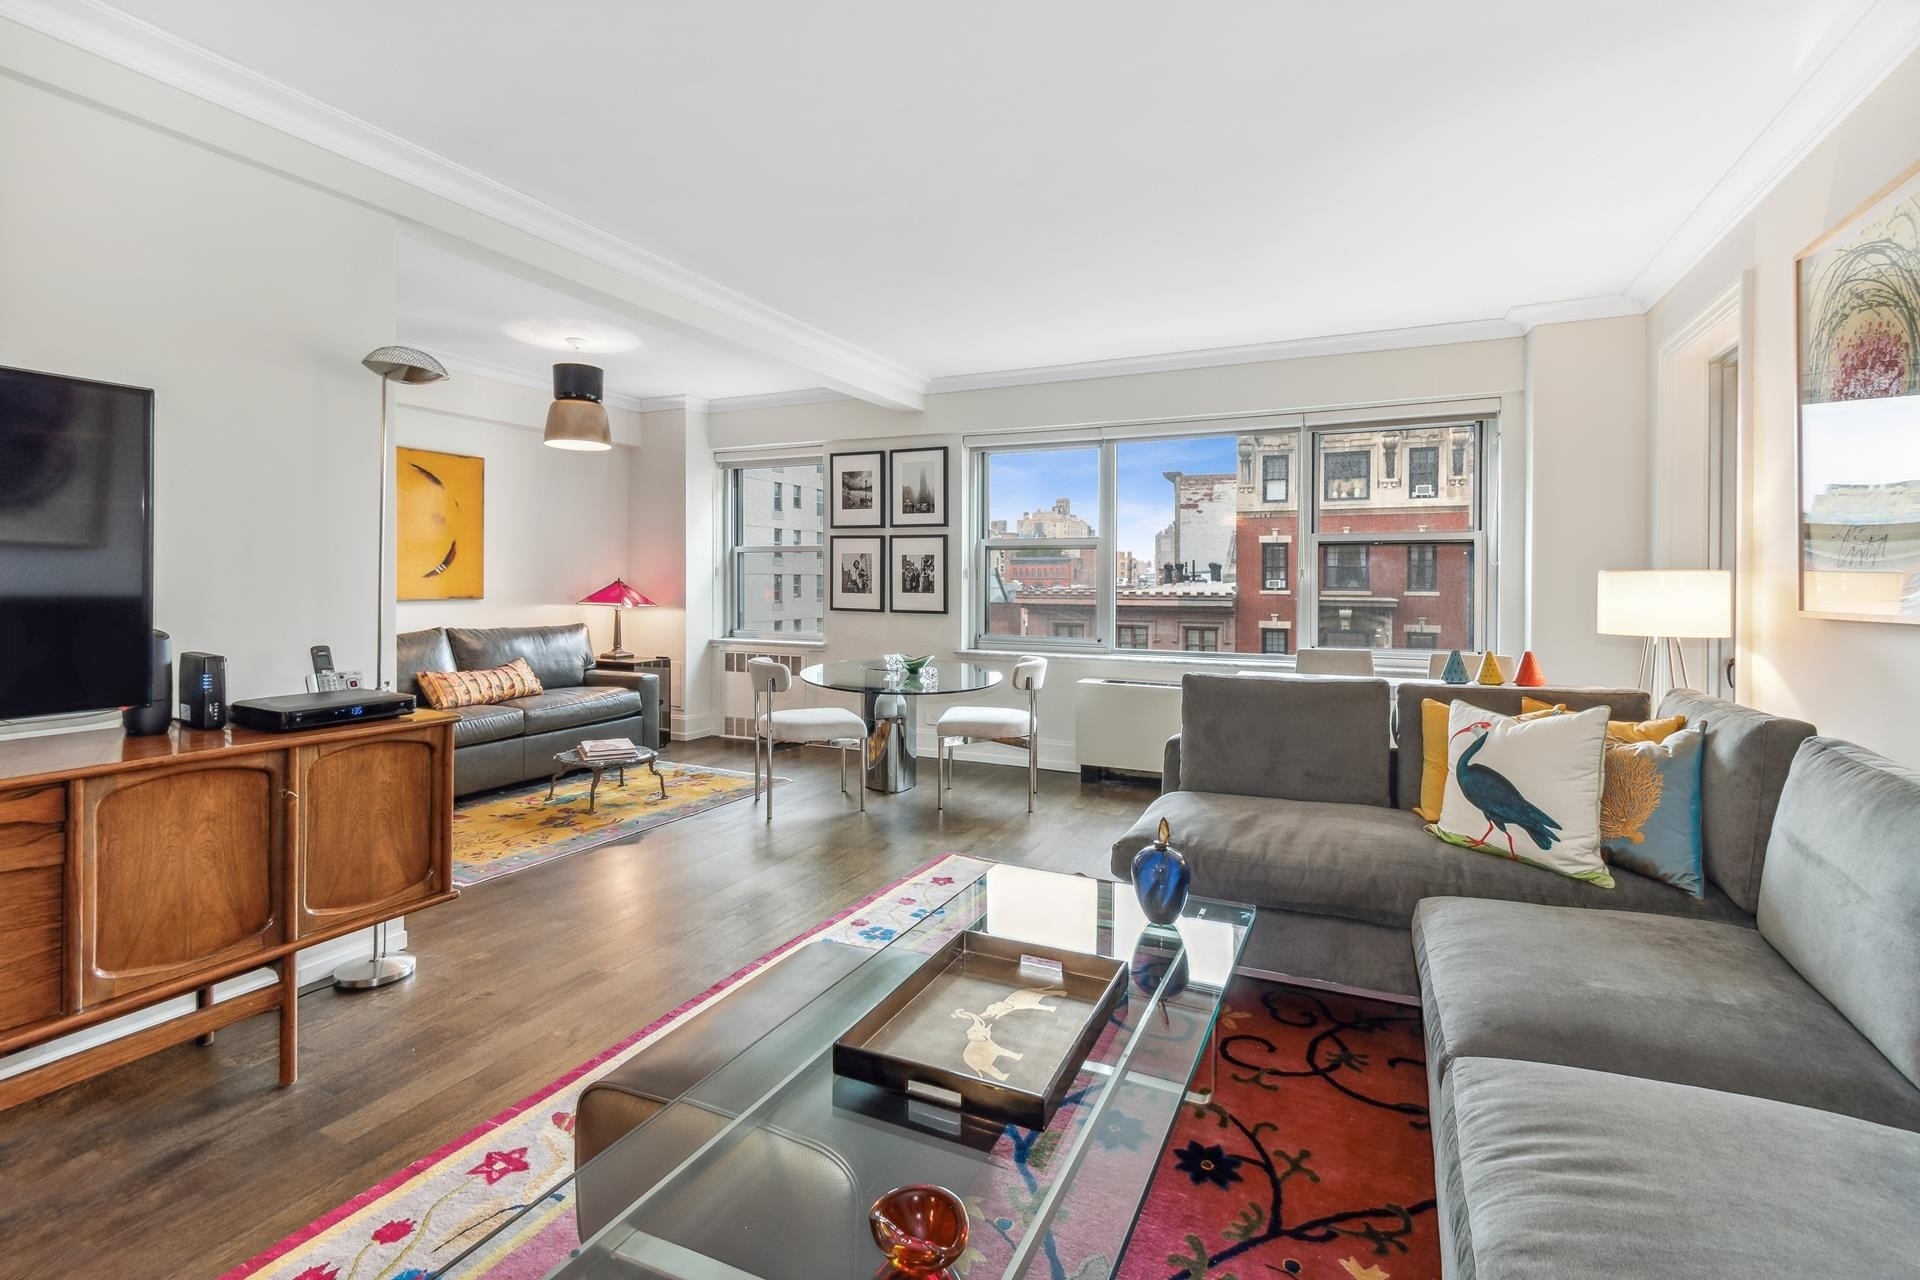 Co-op Properties for Sale at The Brevoort, 11 FIFTH AVE, 7H Greenwich Village, New York, NY 10003